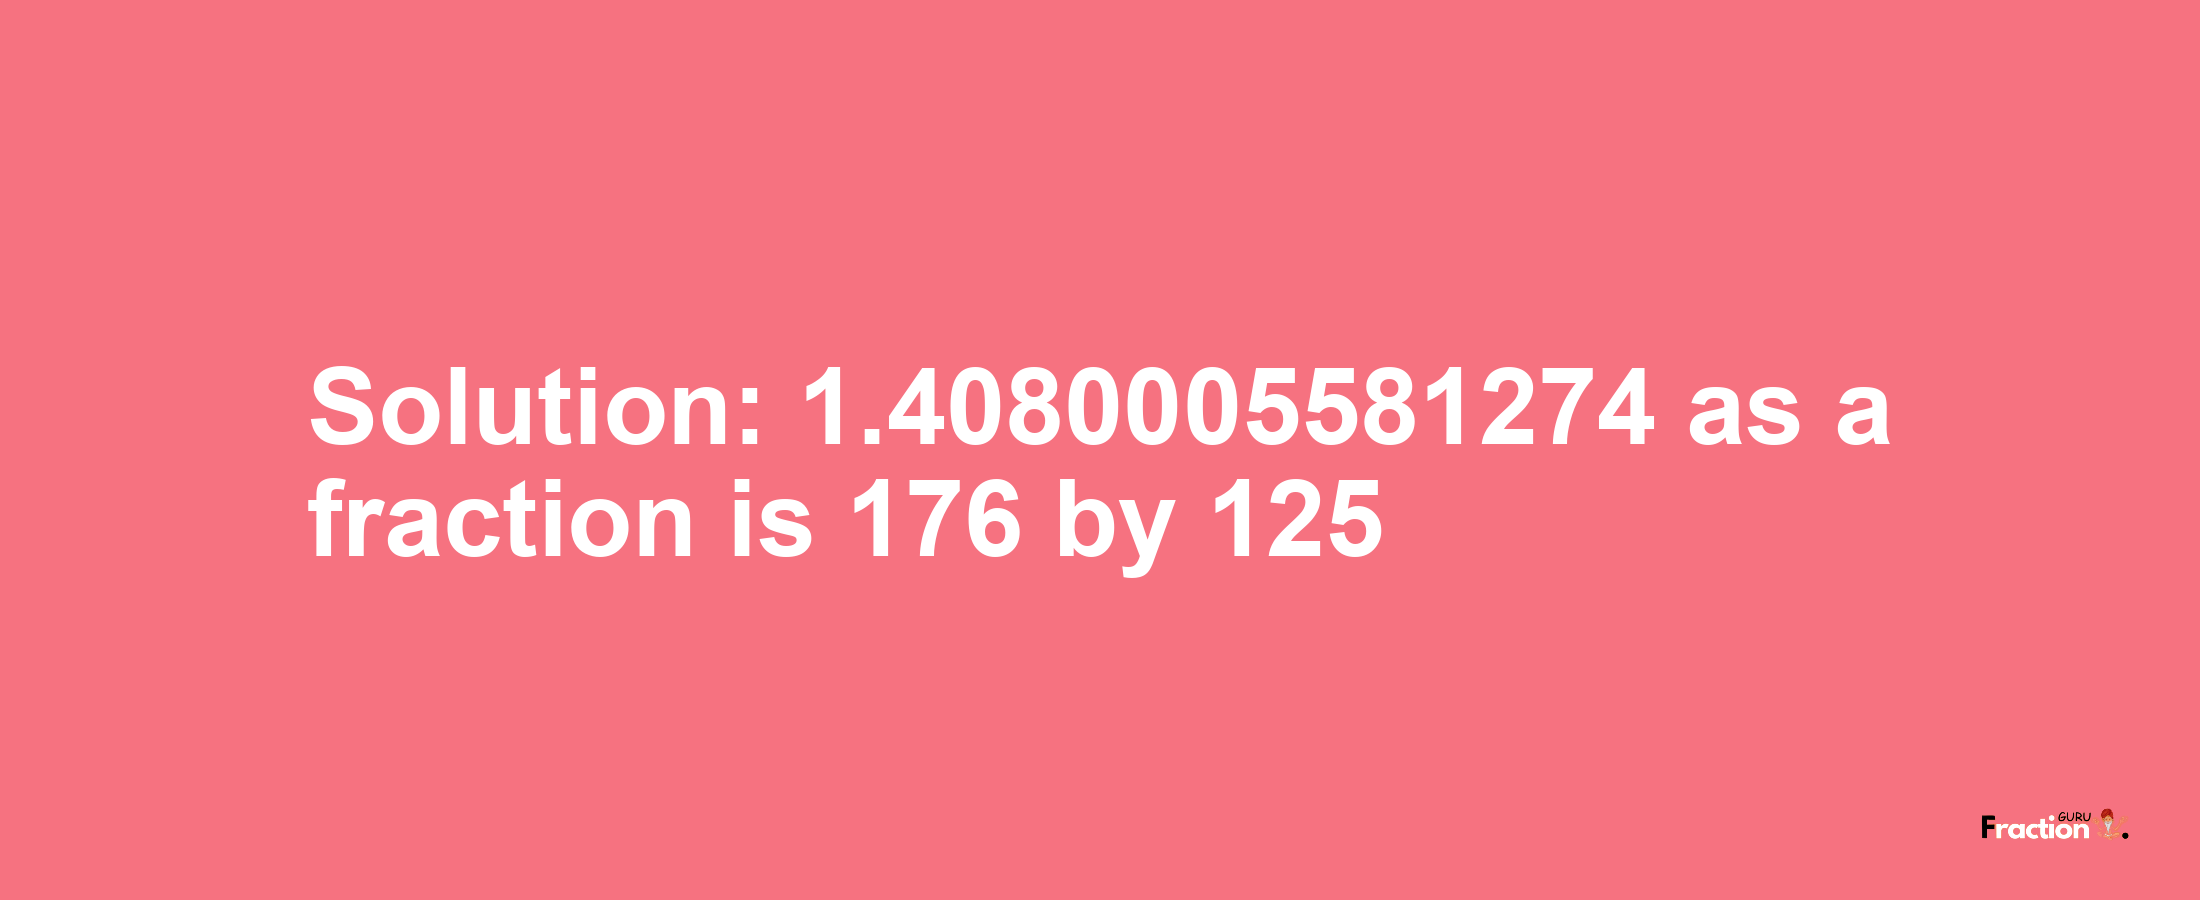 Solution:1.4080005581274 as a fraction is 176/125